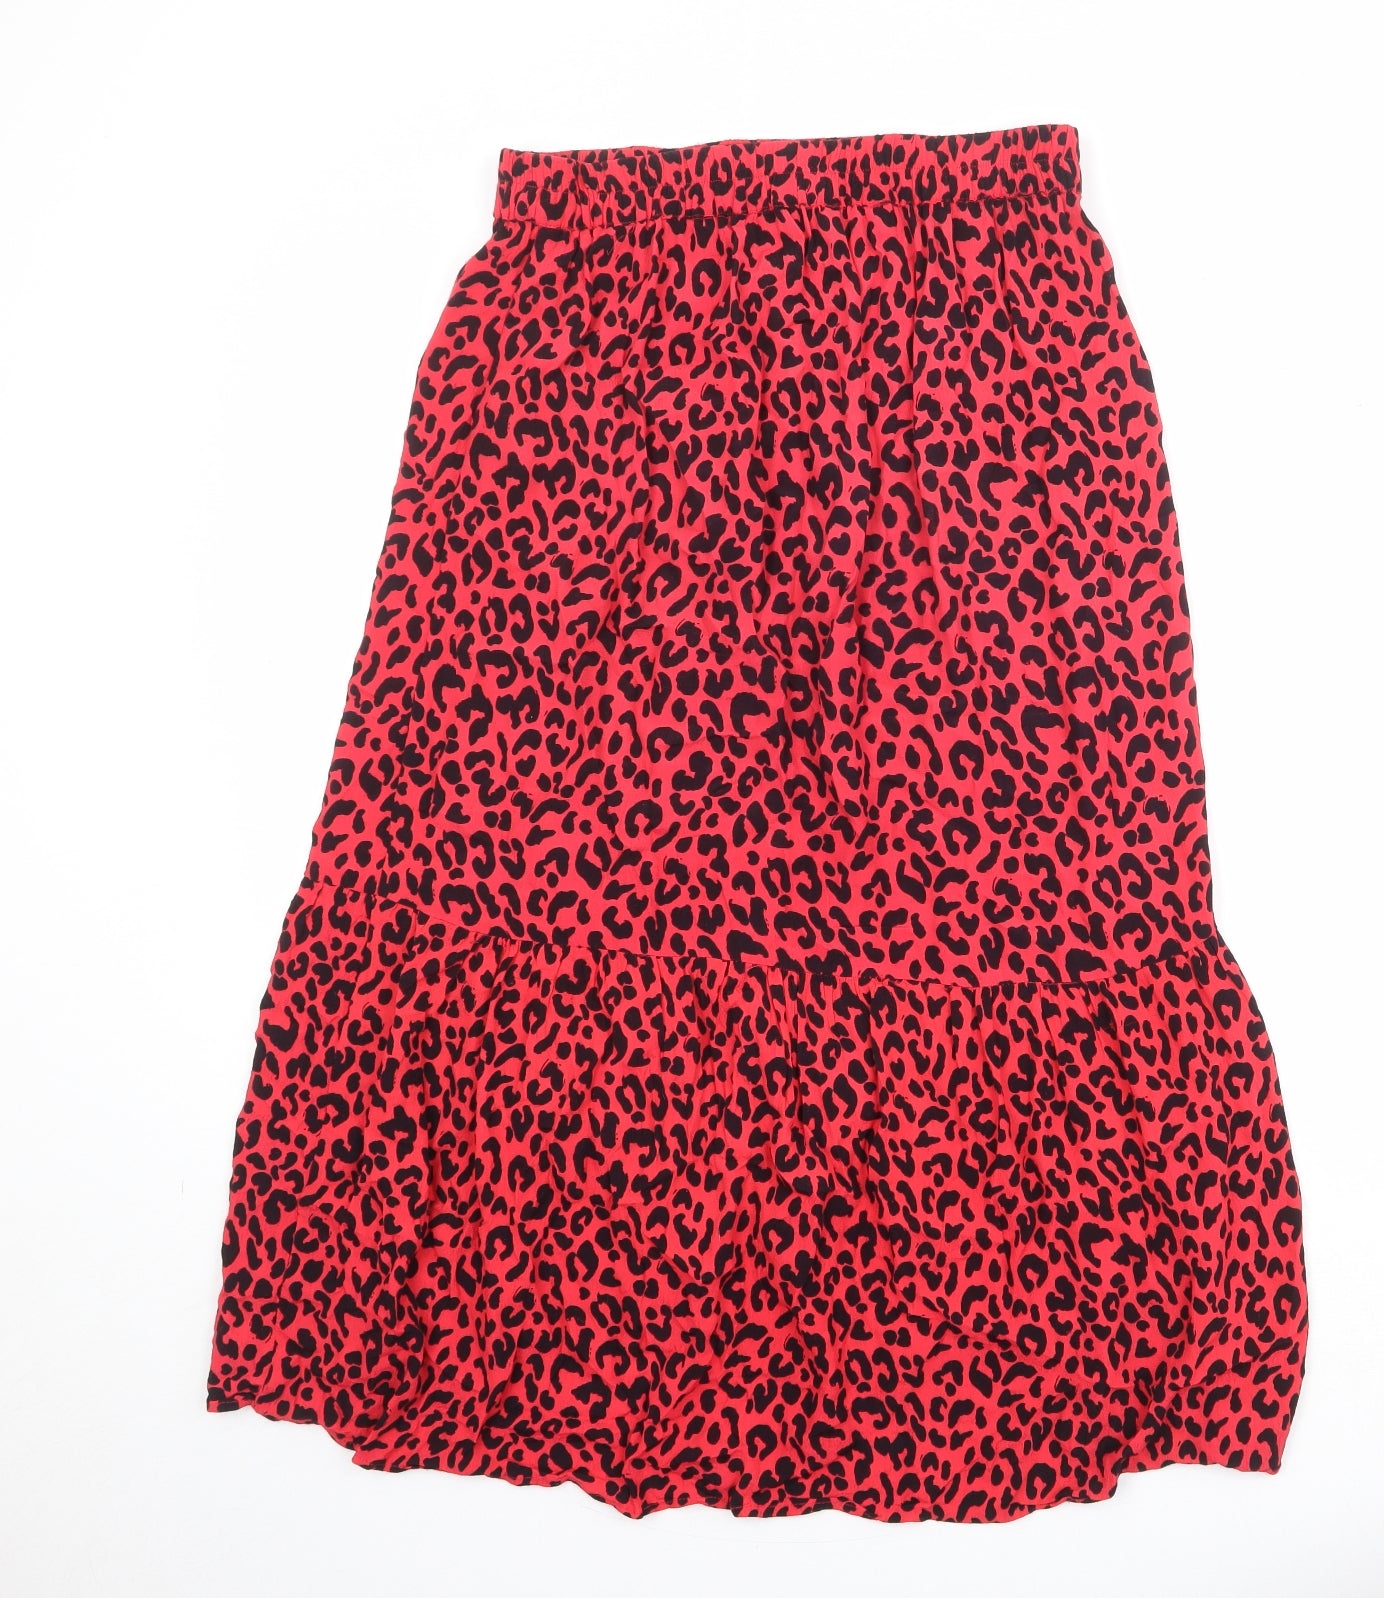 Pieces Womens Red Animal Print Viscose Peasant Skirt Size M - Leopard Pattern